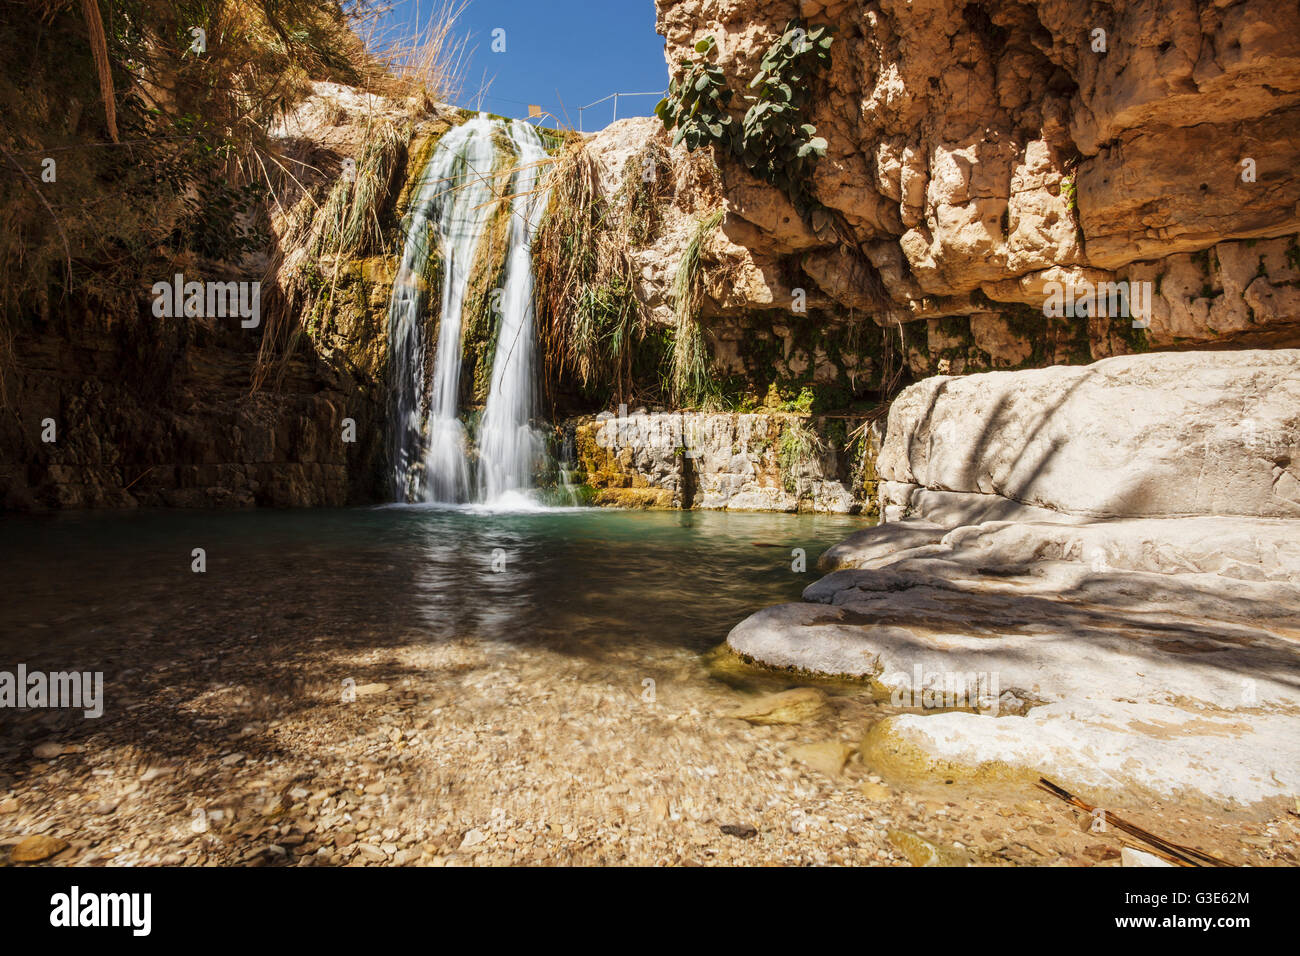 David And His Men Stayed In Ein Gedi And Certainly Enjoyed The Fresh Water Falling From The Desert Plateau Above. There Are Several Waterfalls Of D... Stock Photo